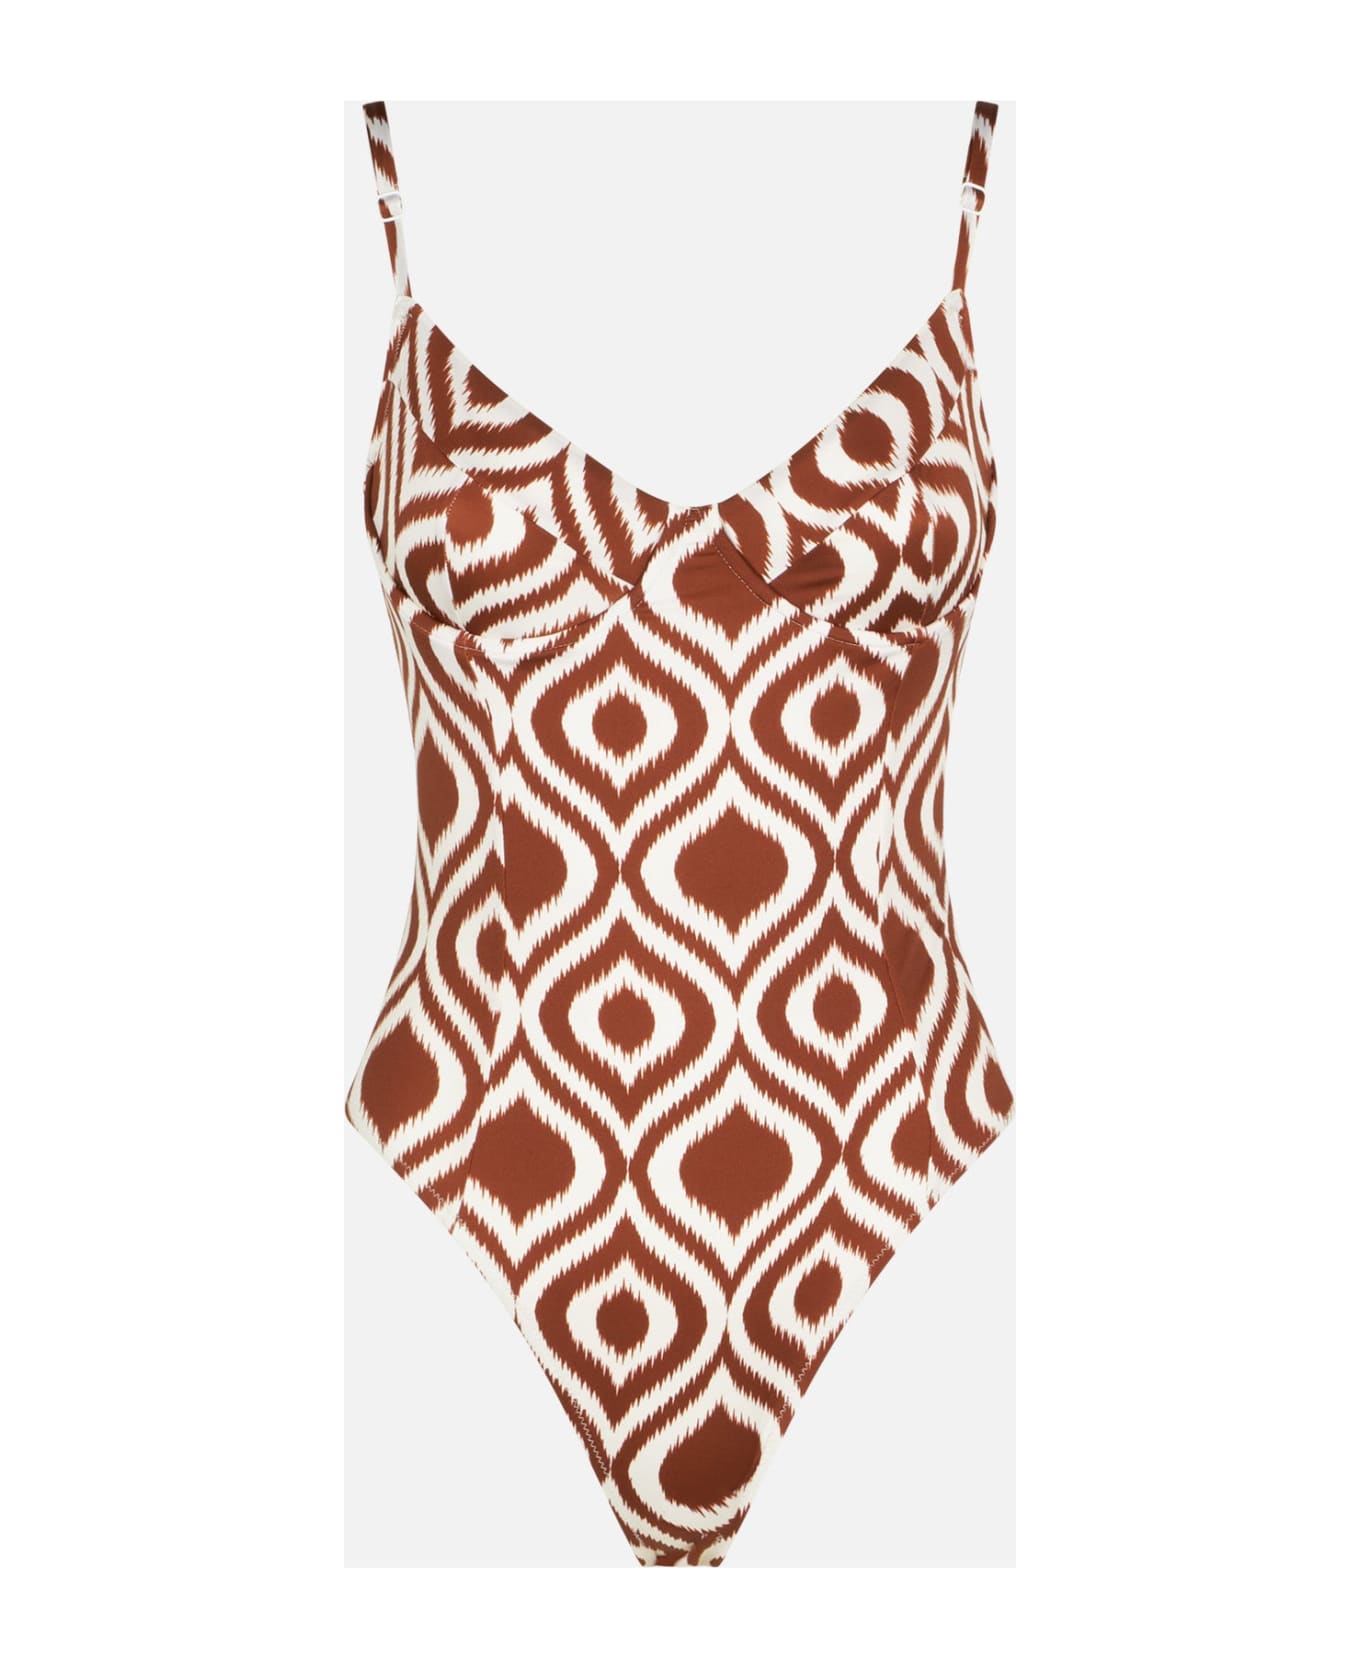 MC2 Saint Barth Woman Underwire One-piece Swimsuit With Pattern - BROWN